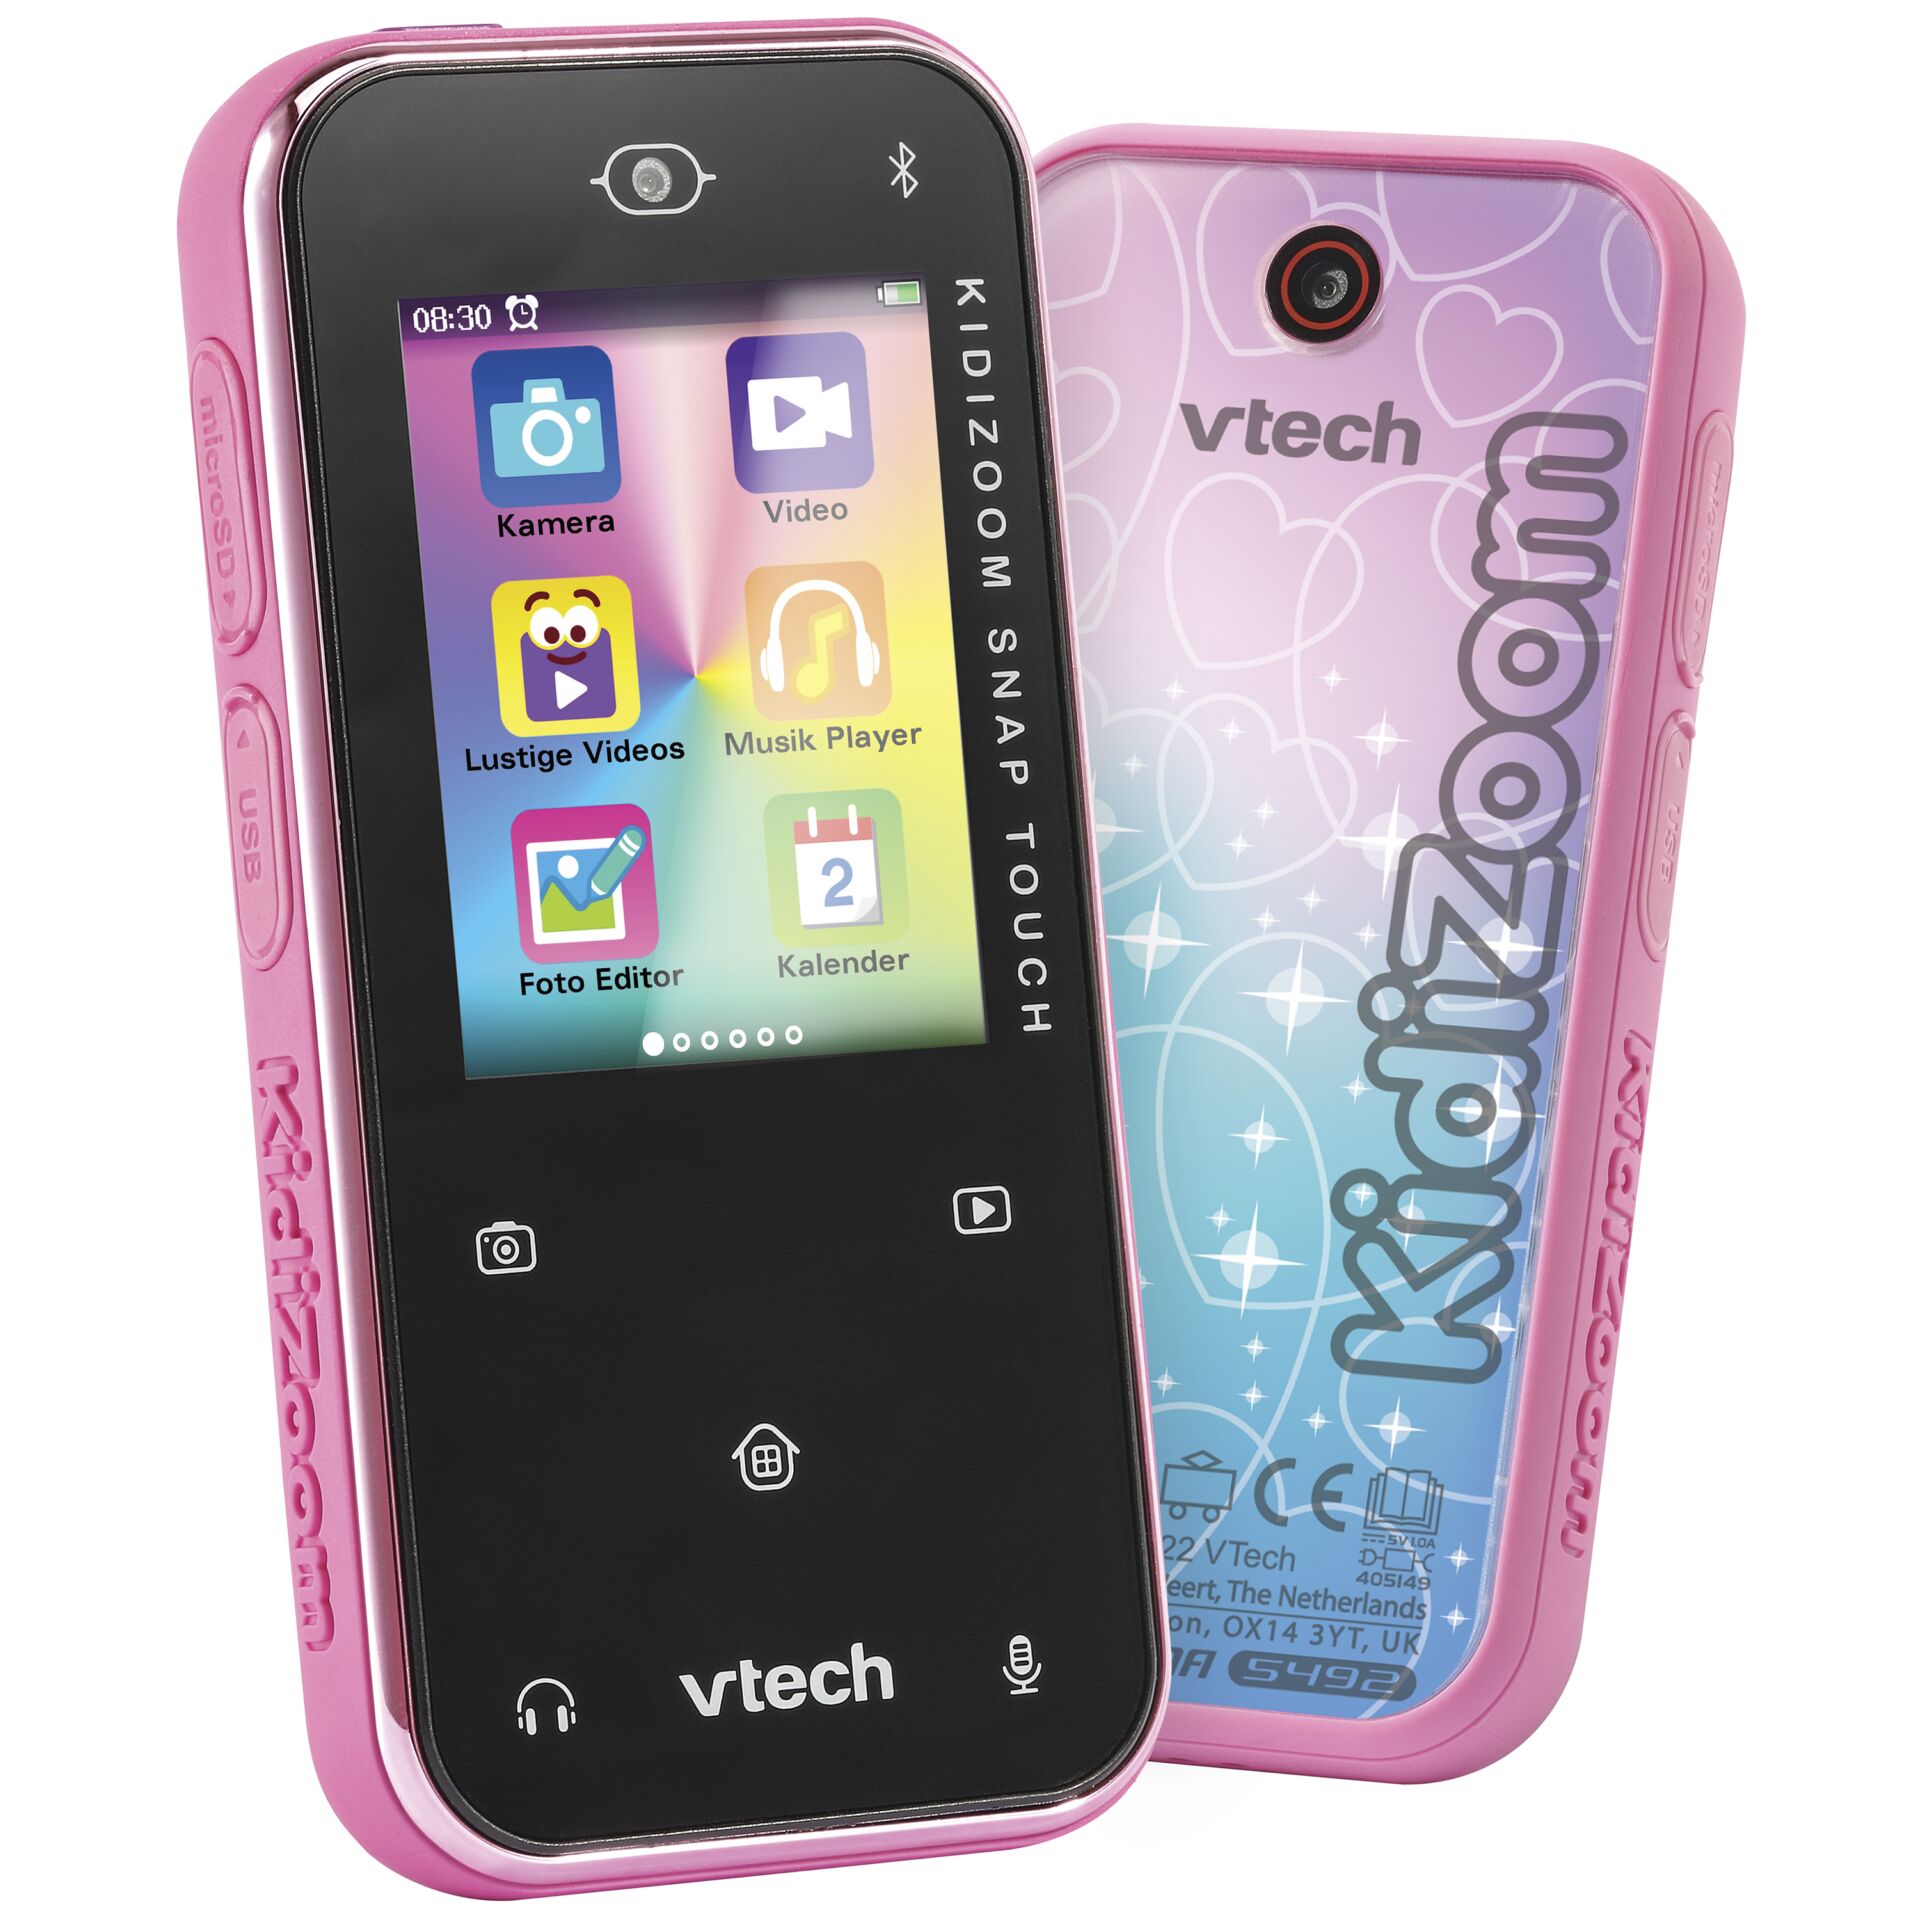 VTech Kidizoom Snap touch pink